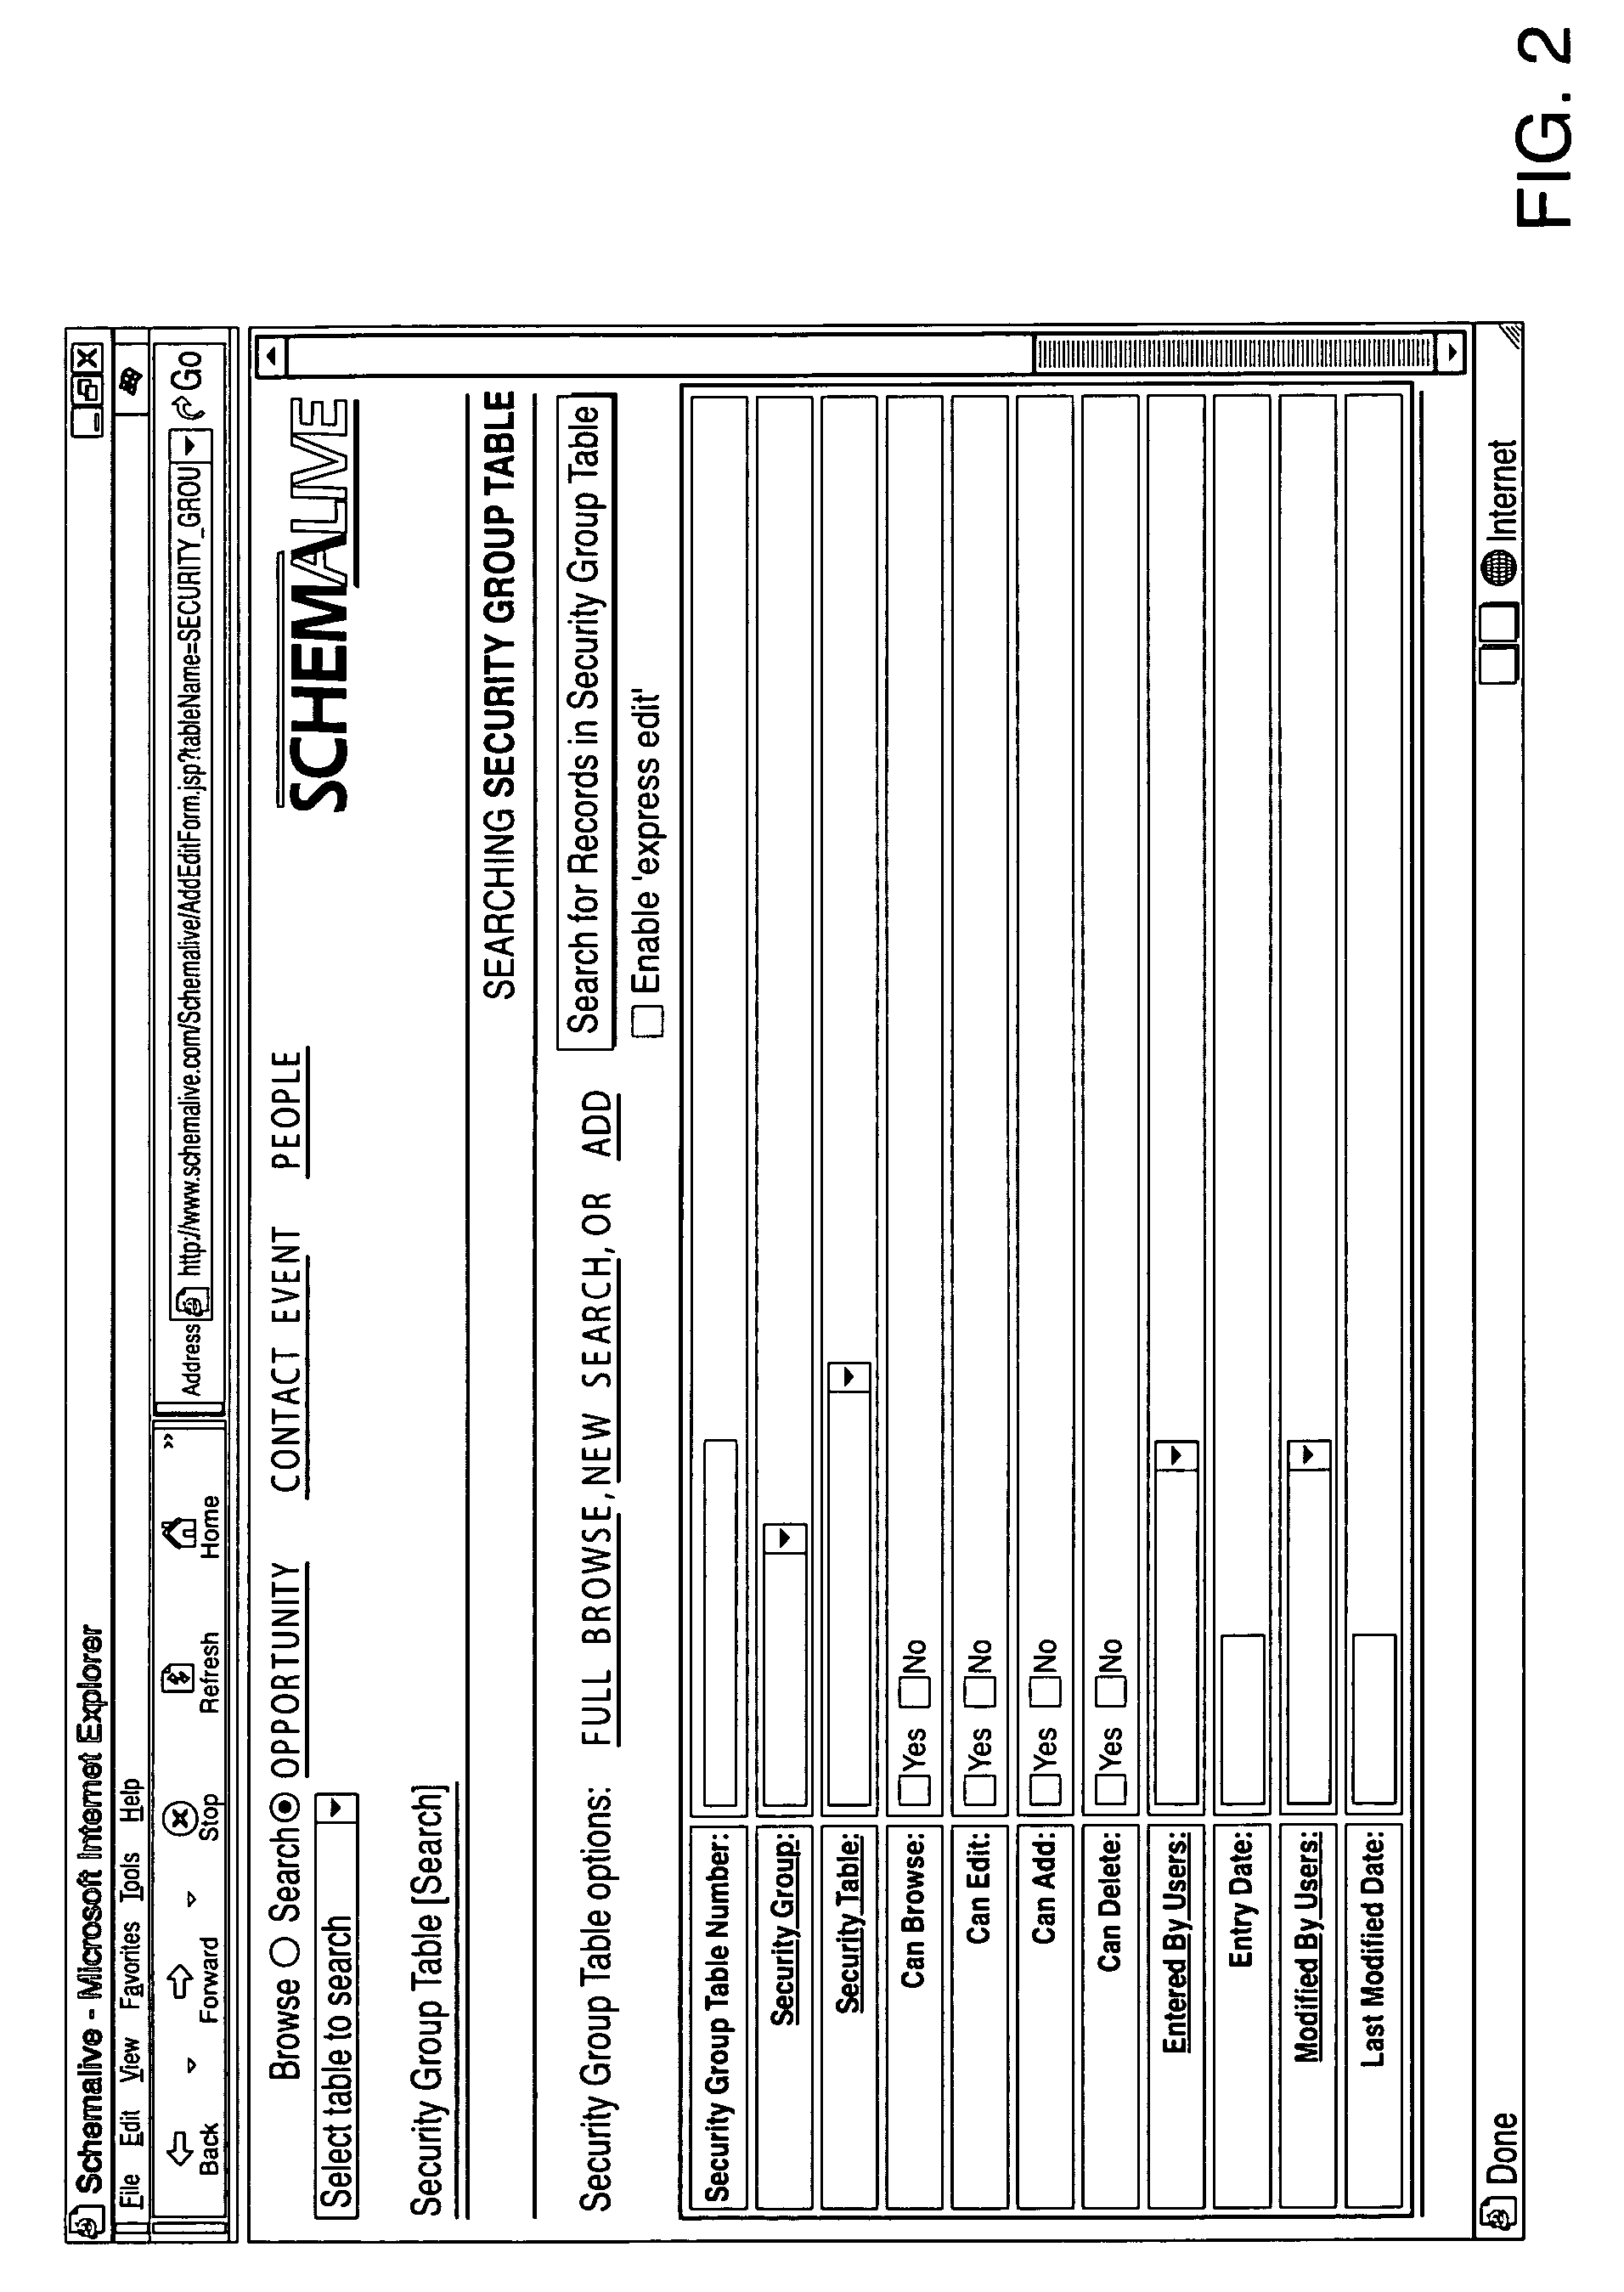 System and method for generating automatic user interface for arbitrarily complex or large databases